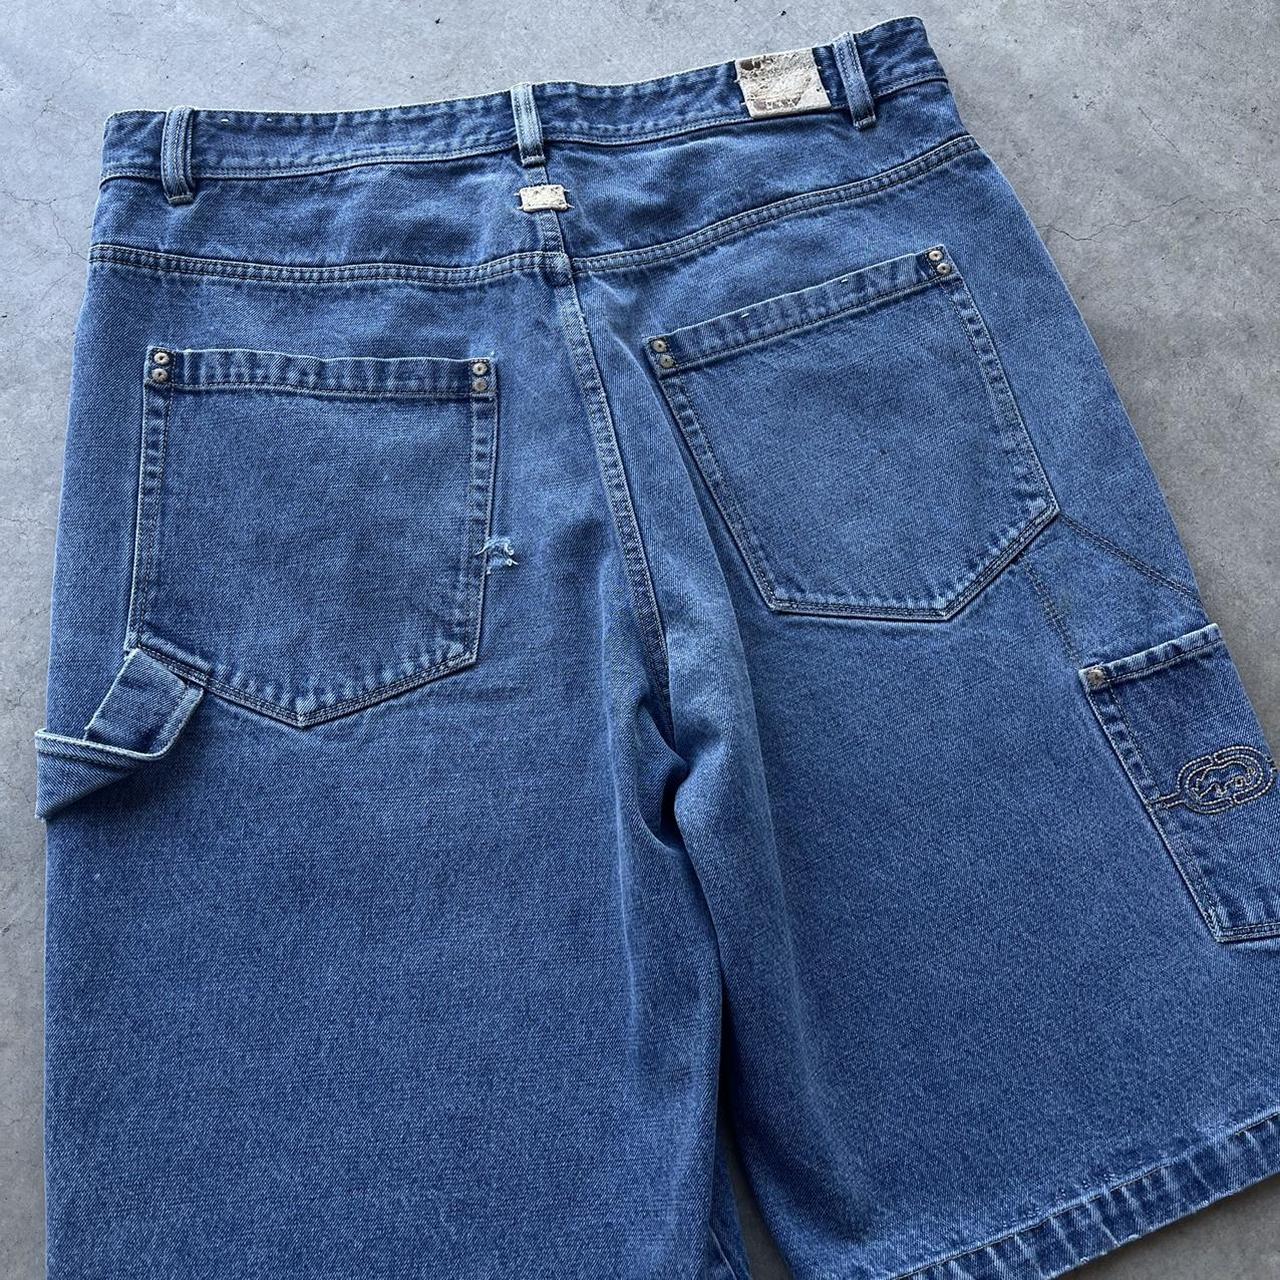 y2k grunge baggy jorts baggy jorts from the early... - Depop